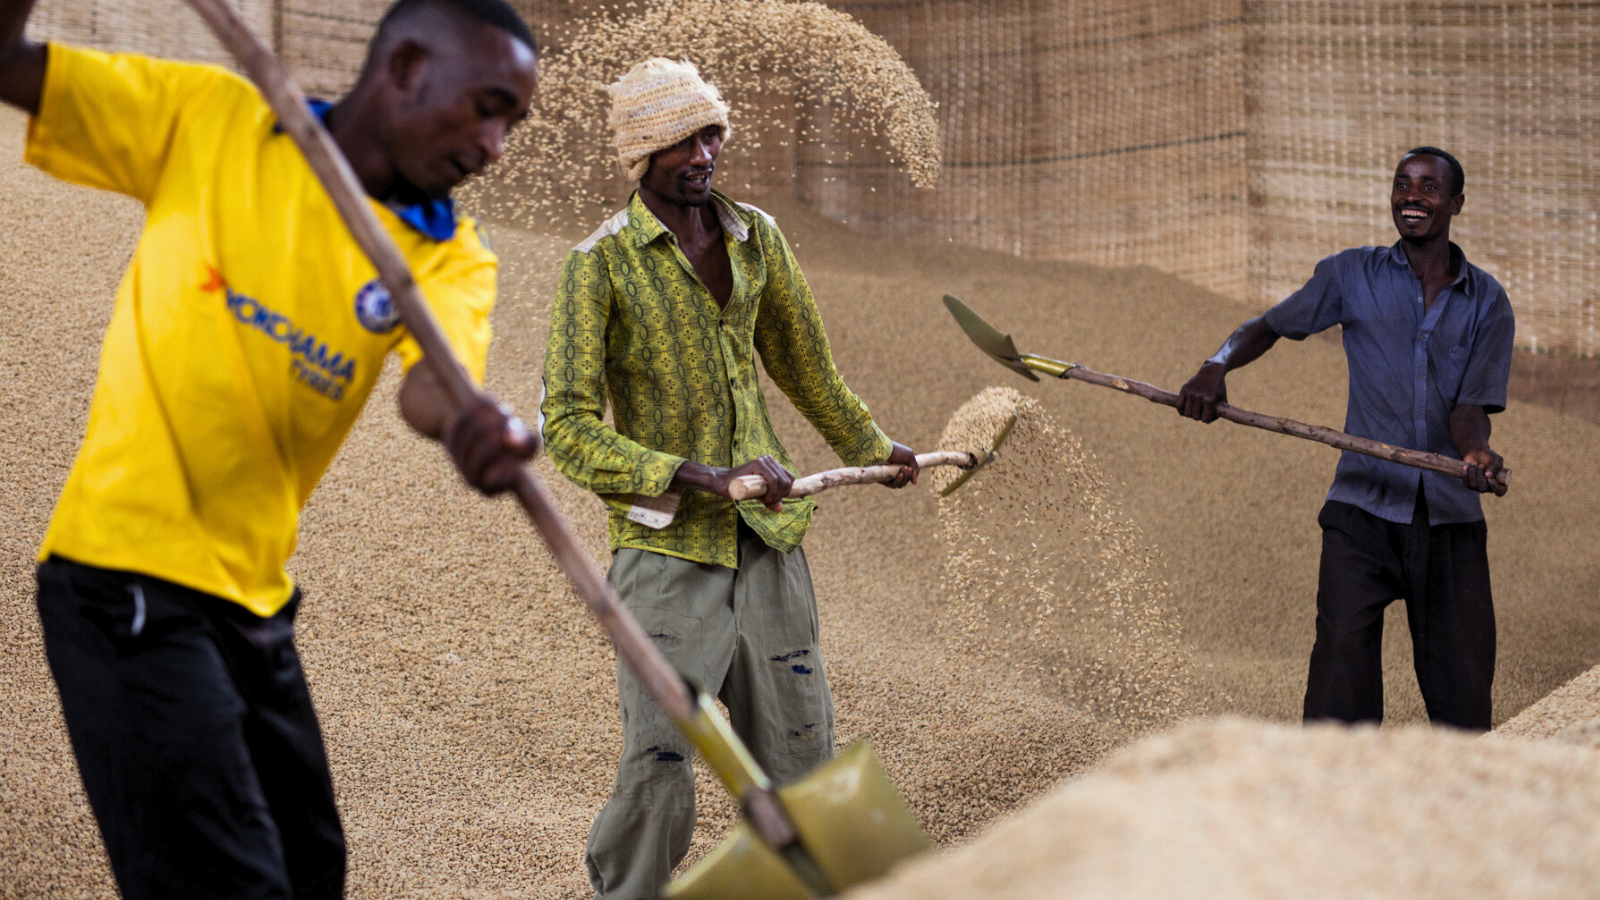 Men with shovels pitching dried coffee in preparation for export